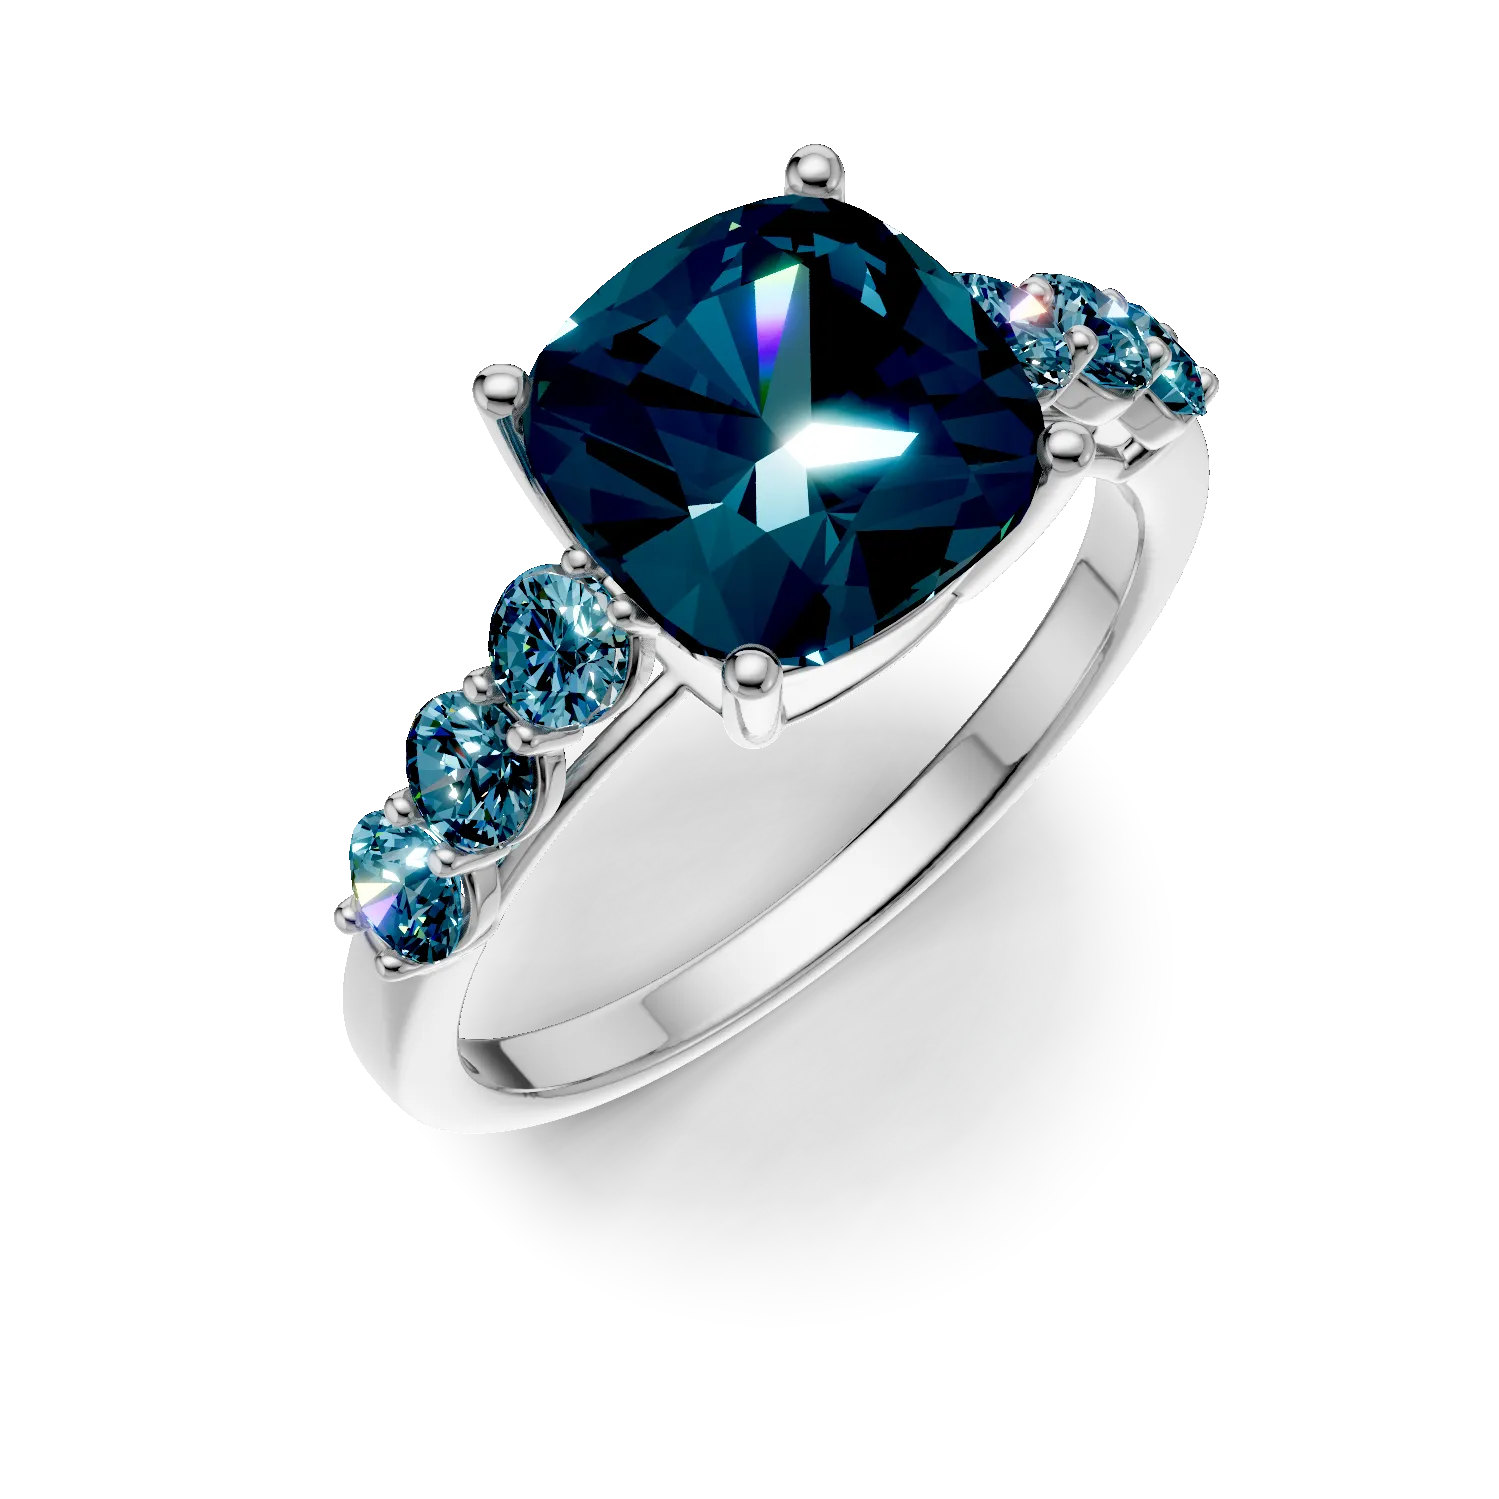 White gold ring with 5.04ct london blue topazes